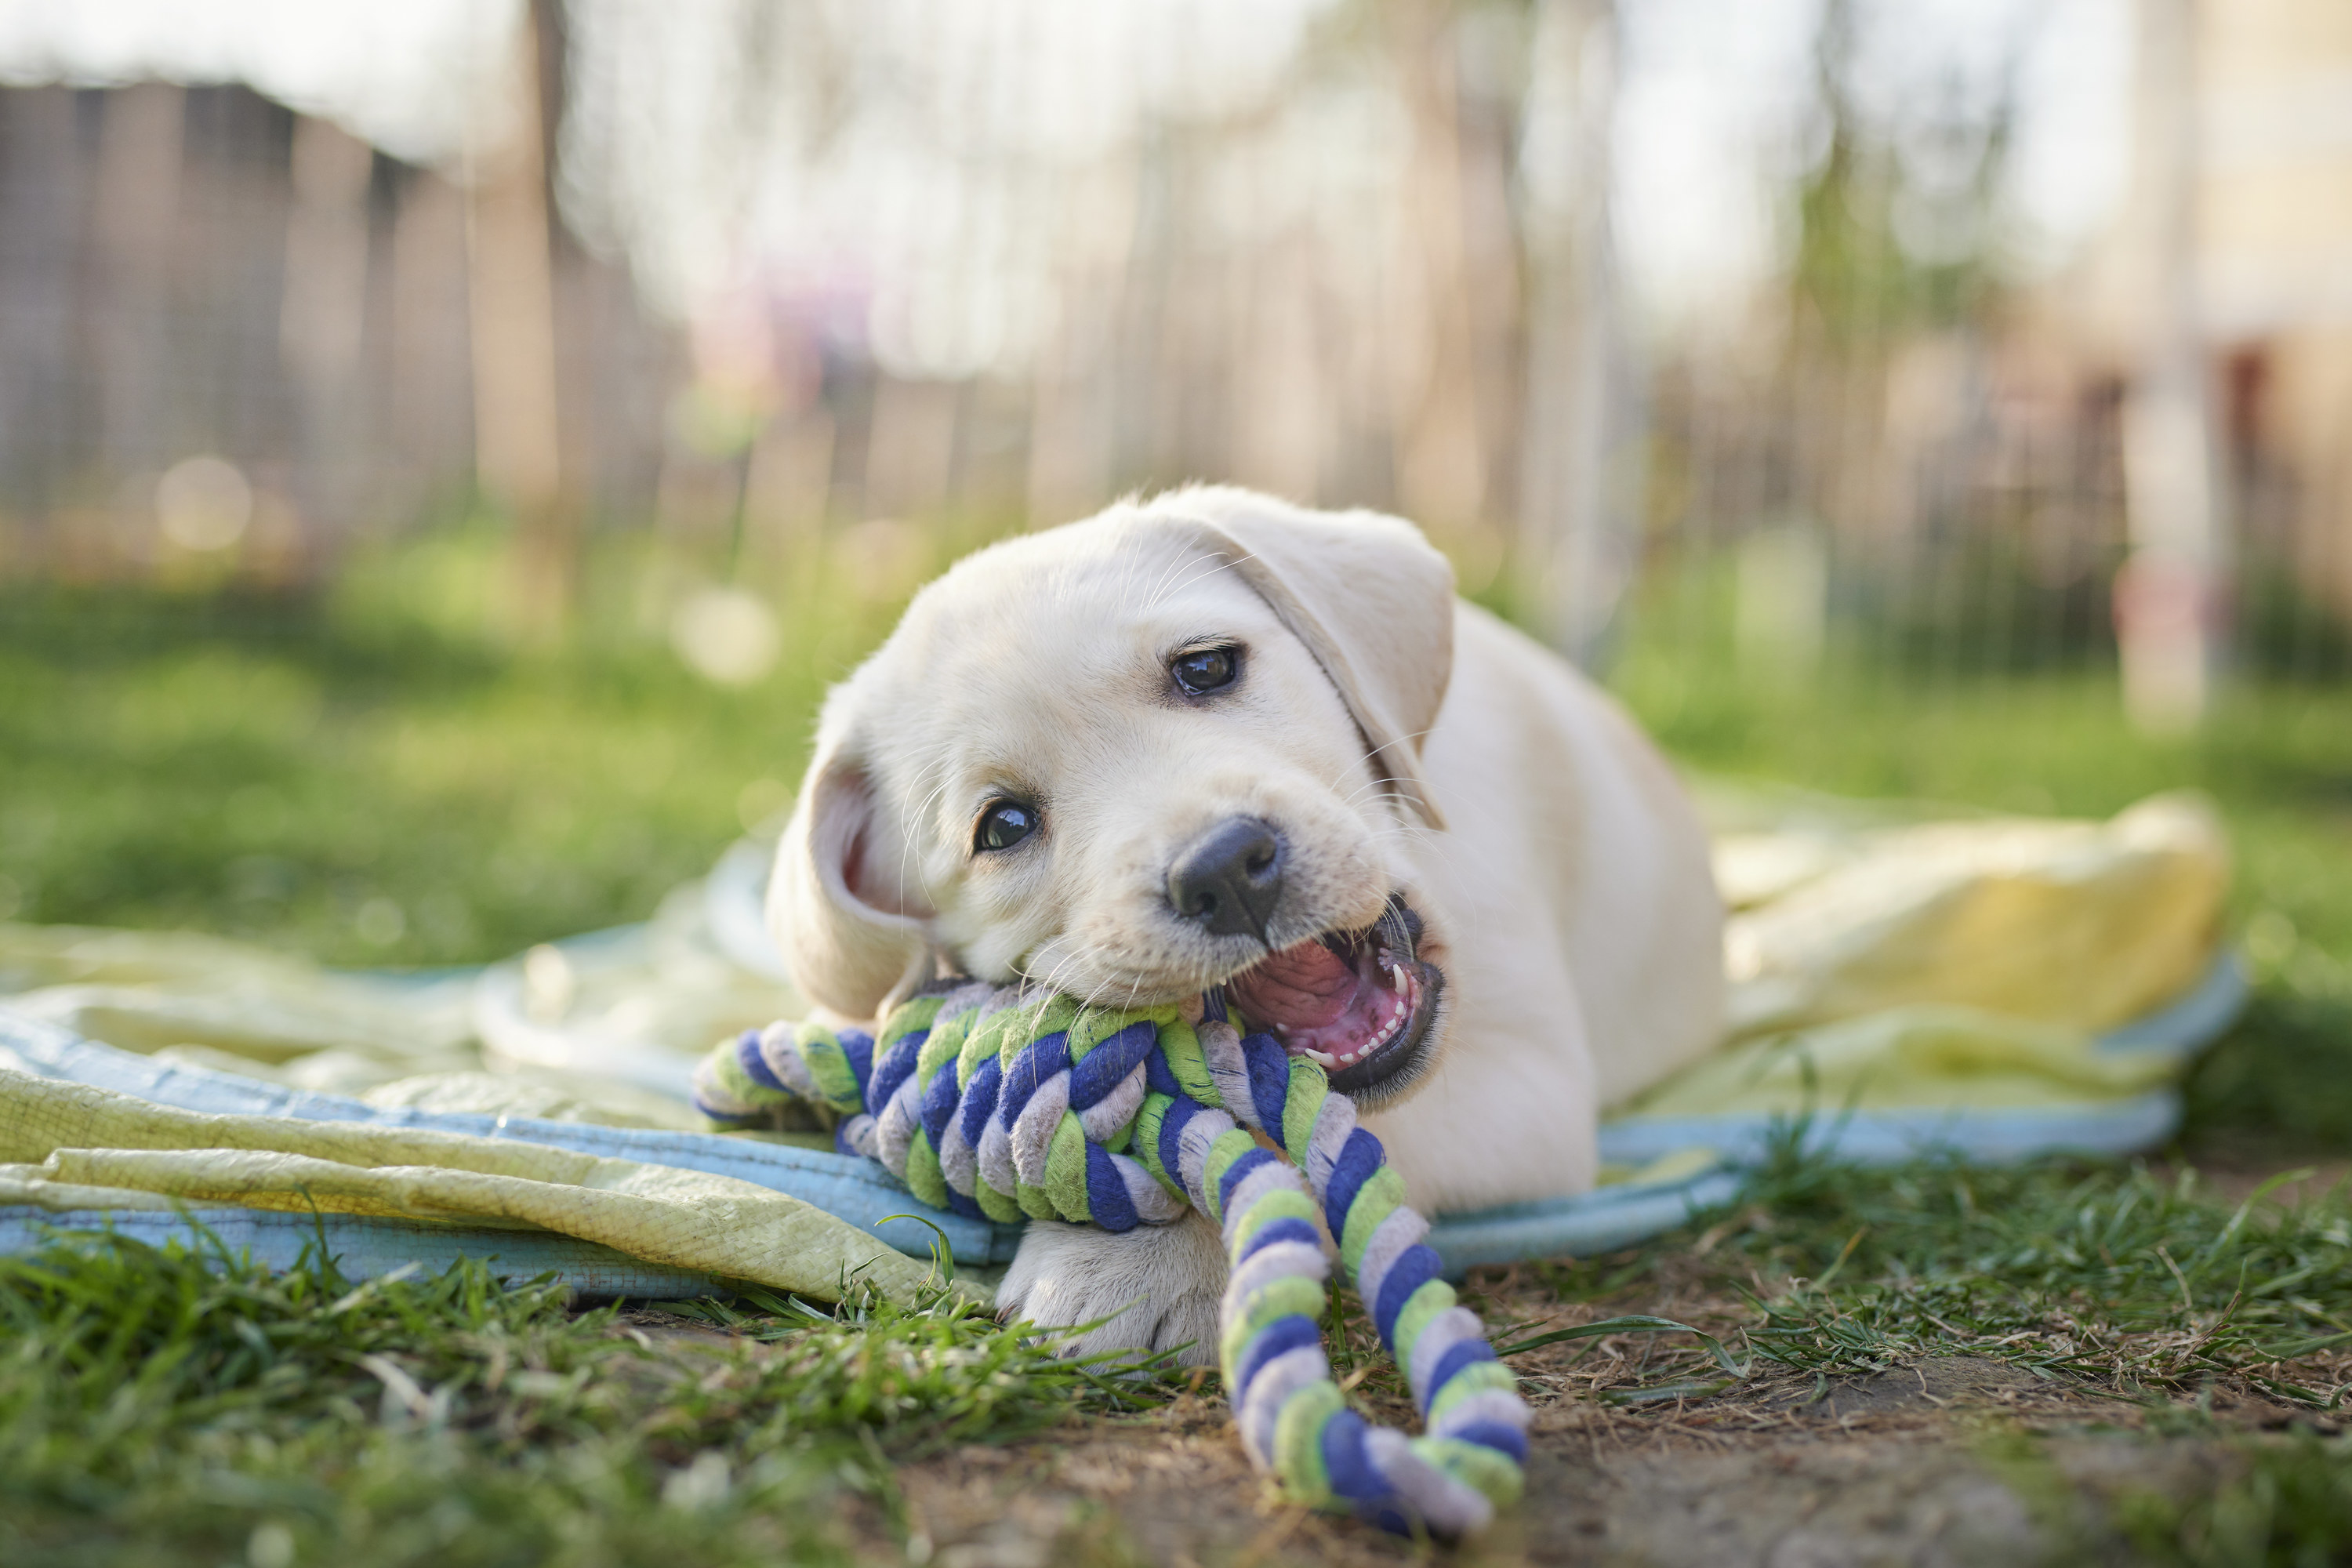 A dog chewing on a chew toy